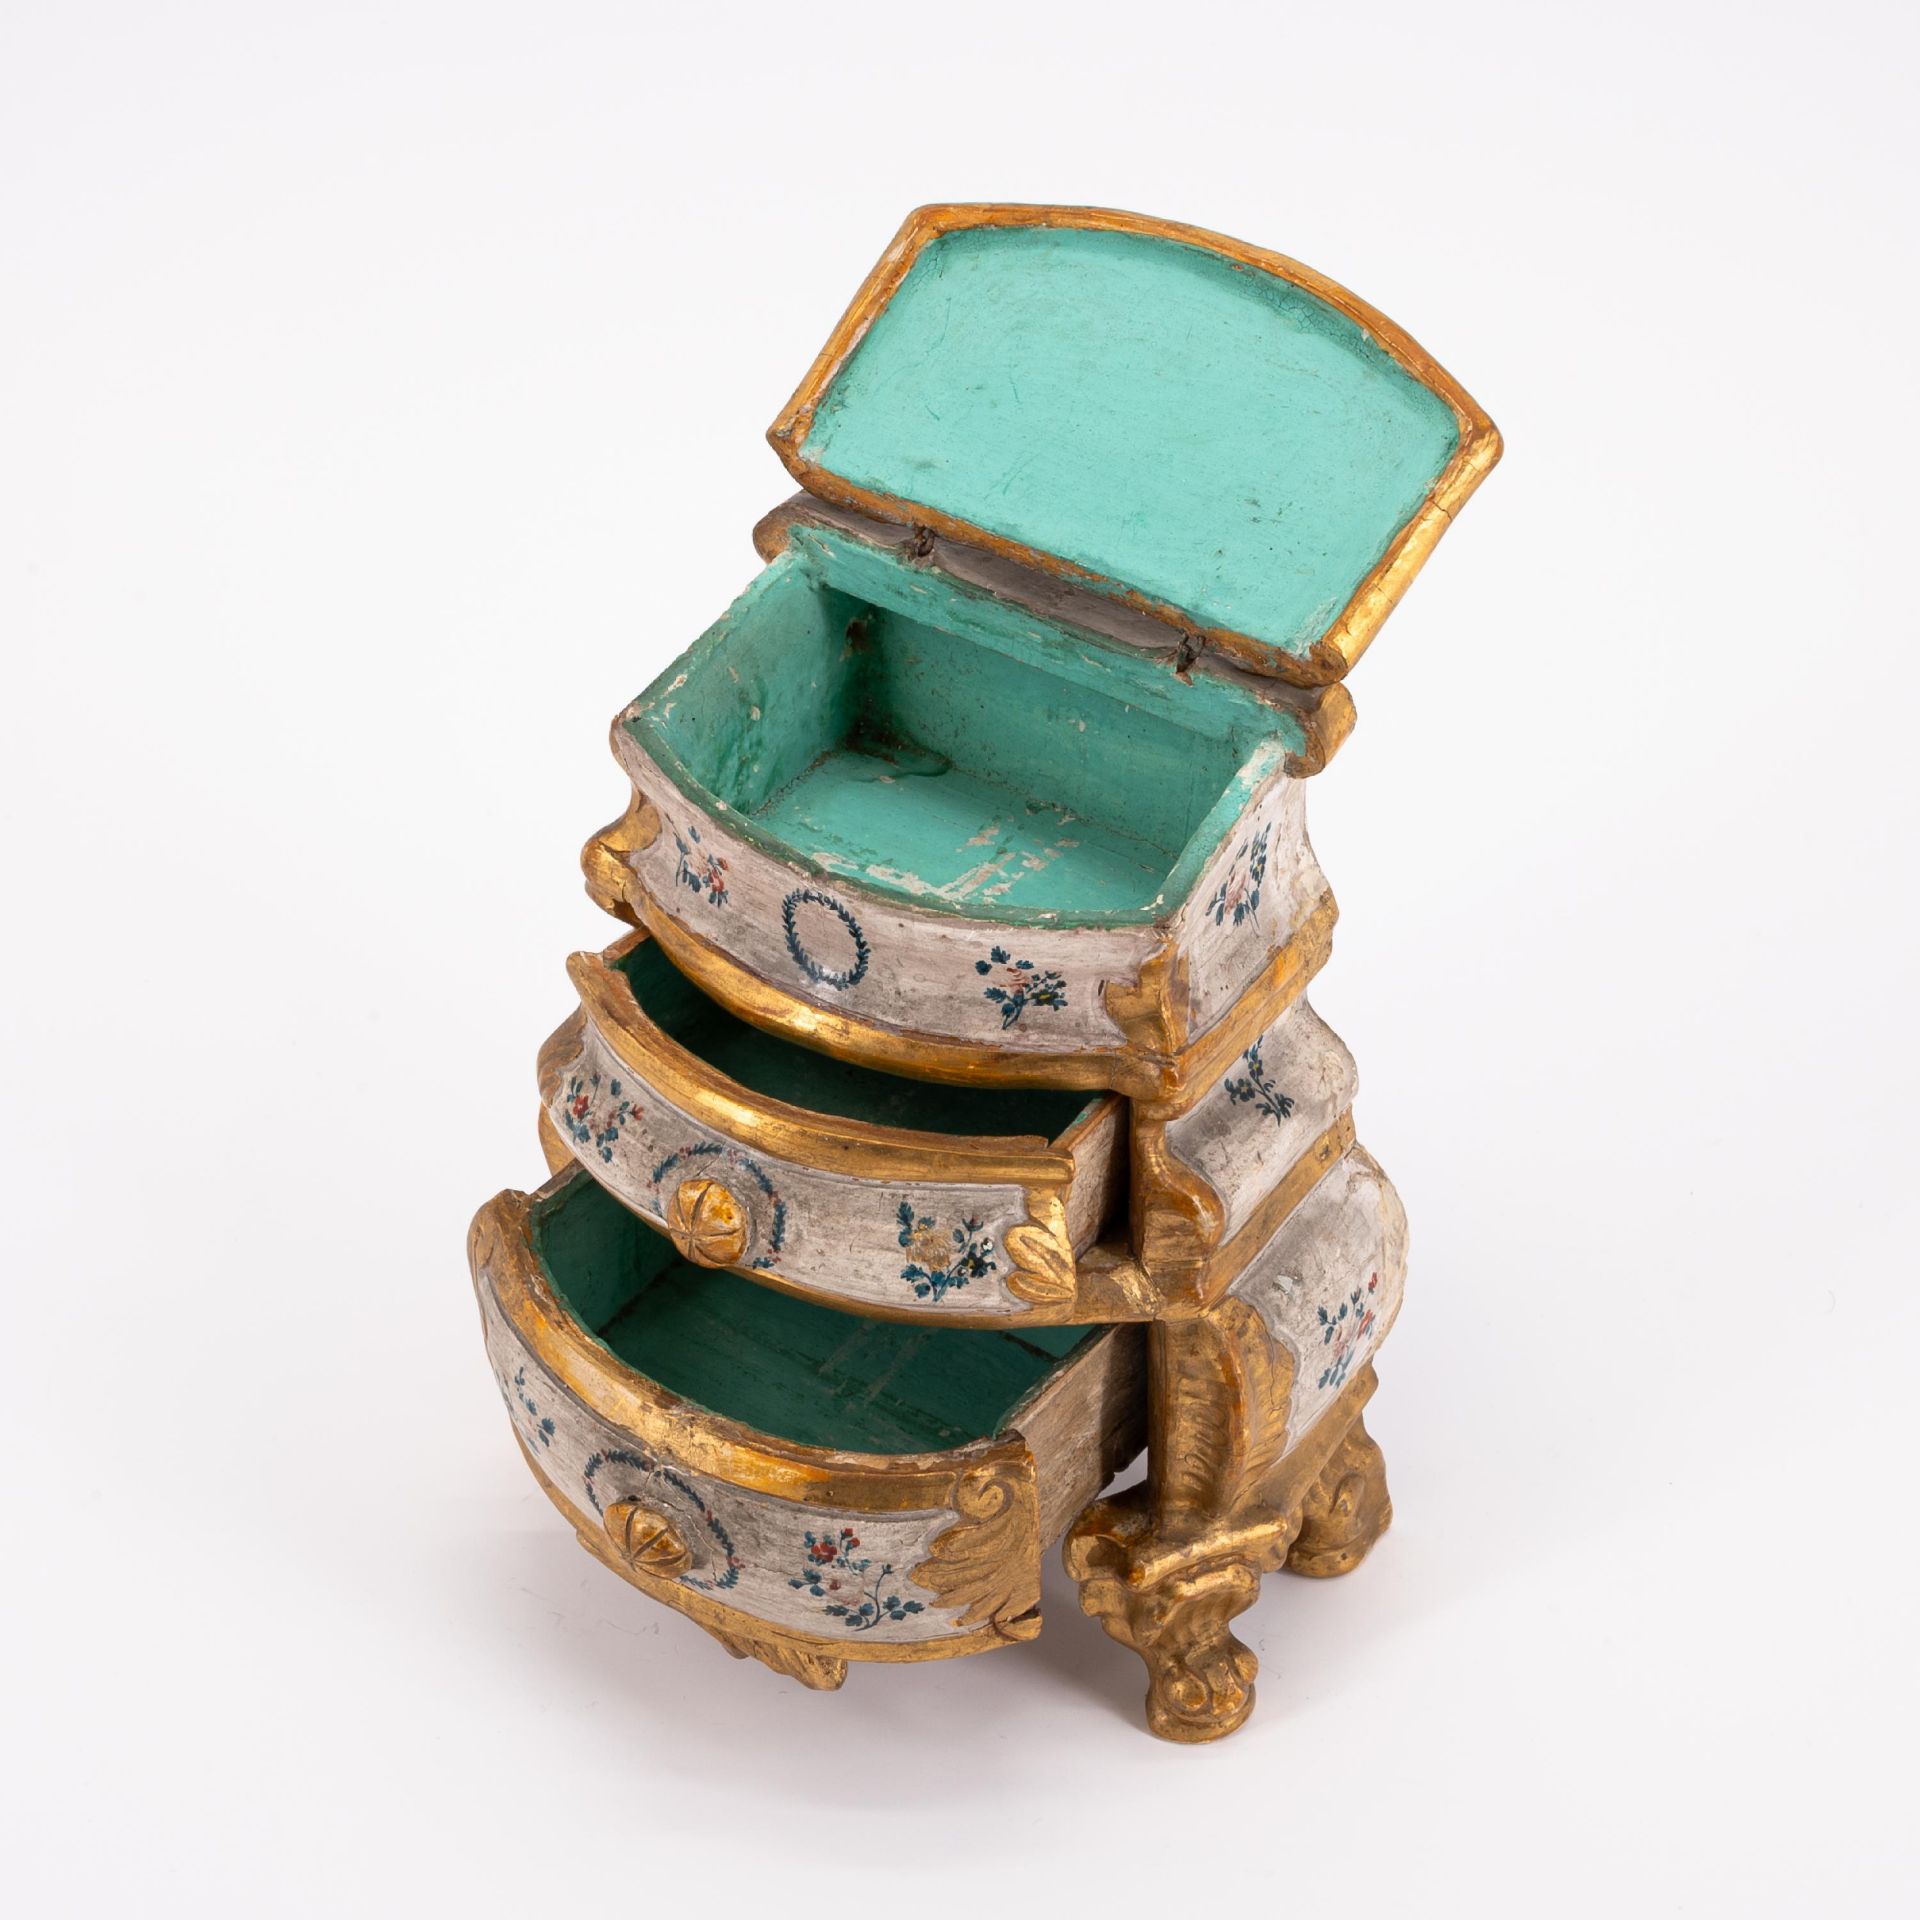 POLYCHROMED WOODEN MINIATURE ROCOCO CHEST OF DRAWERS - Image 3 of 7